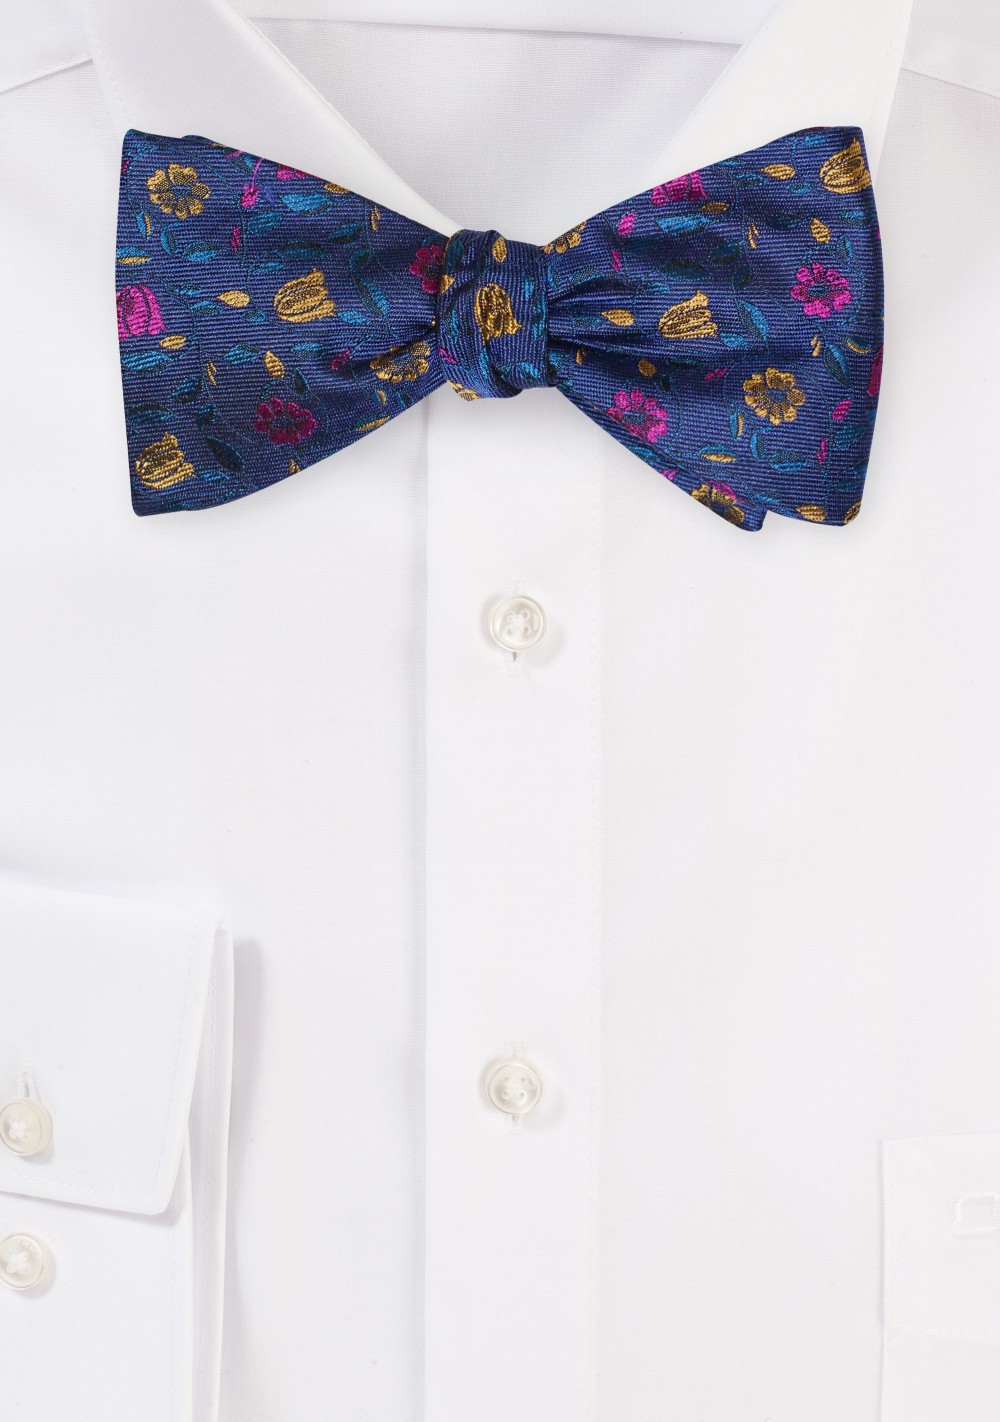 Purple Silk Bowtie with Colorful Floral Design